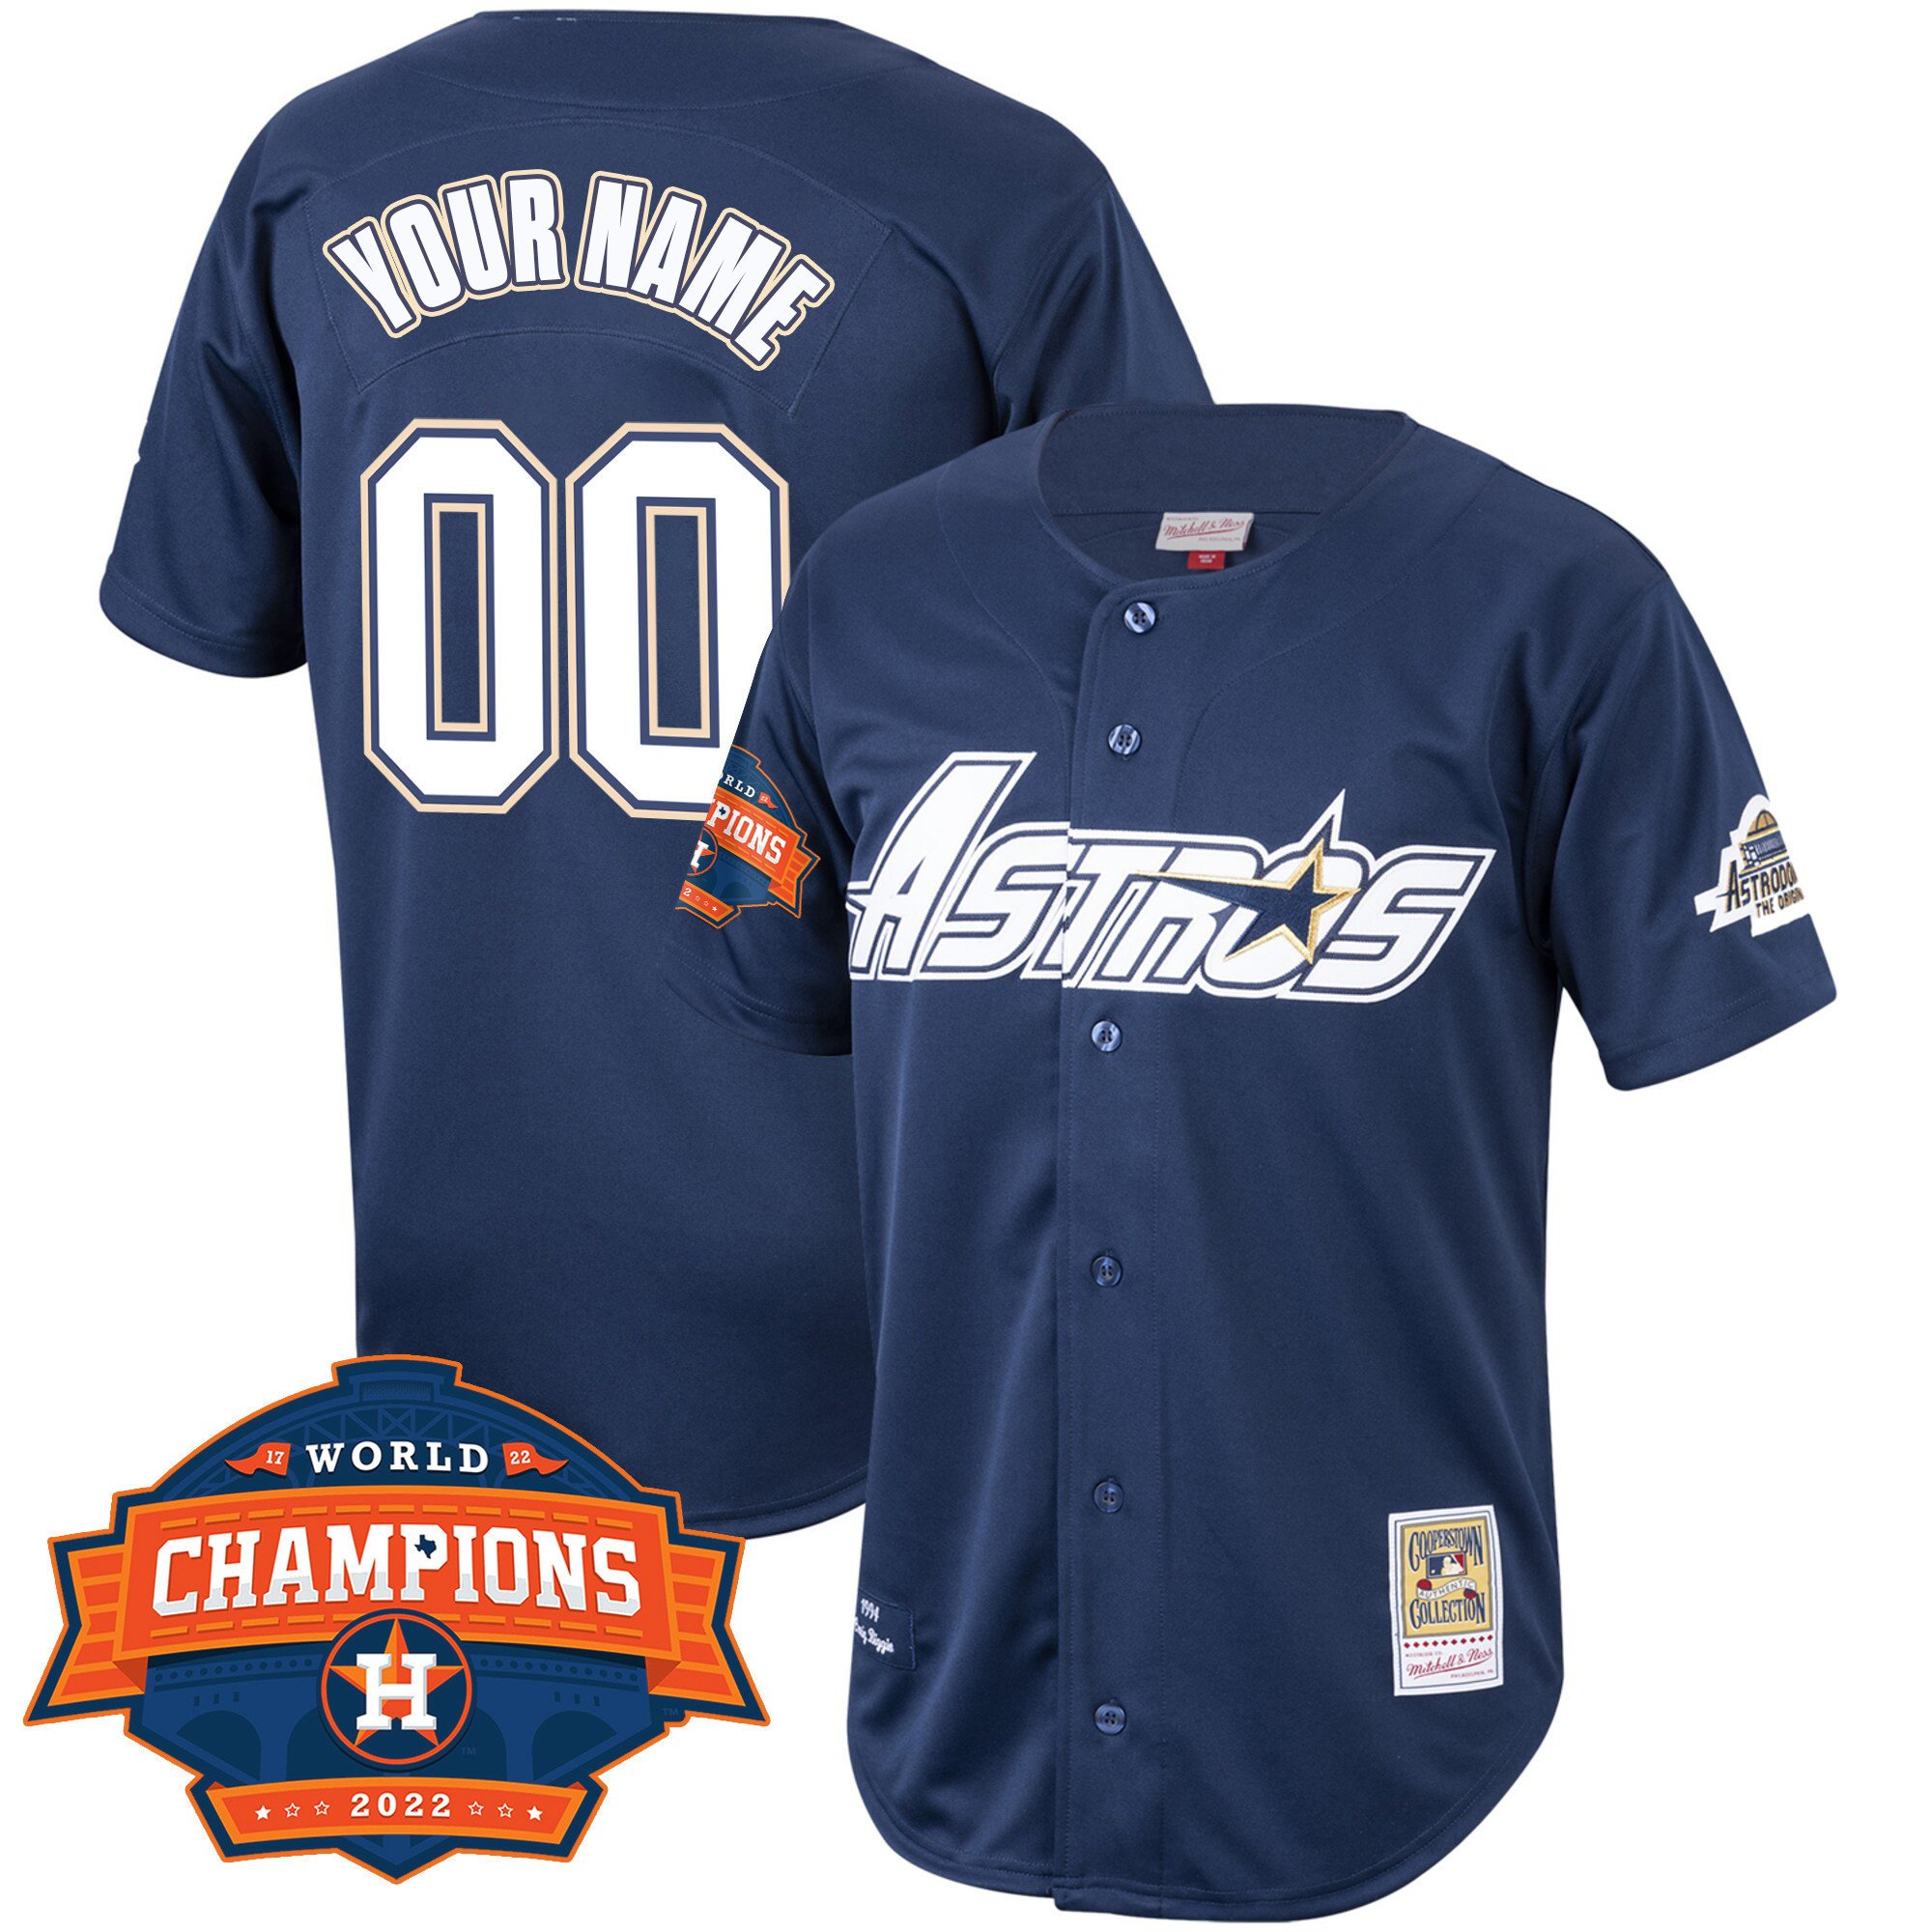 Men's Houston Astros World Series Limited Jersey - All Stitched - Vgear